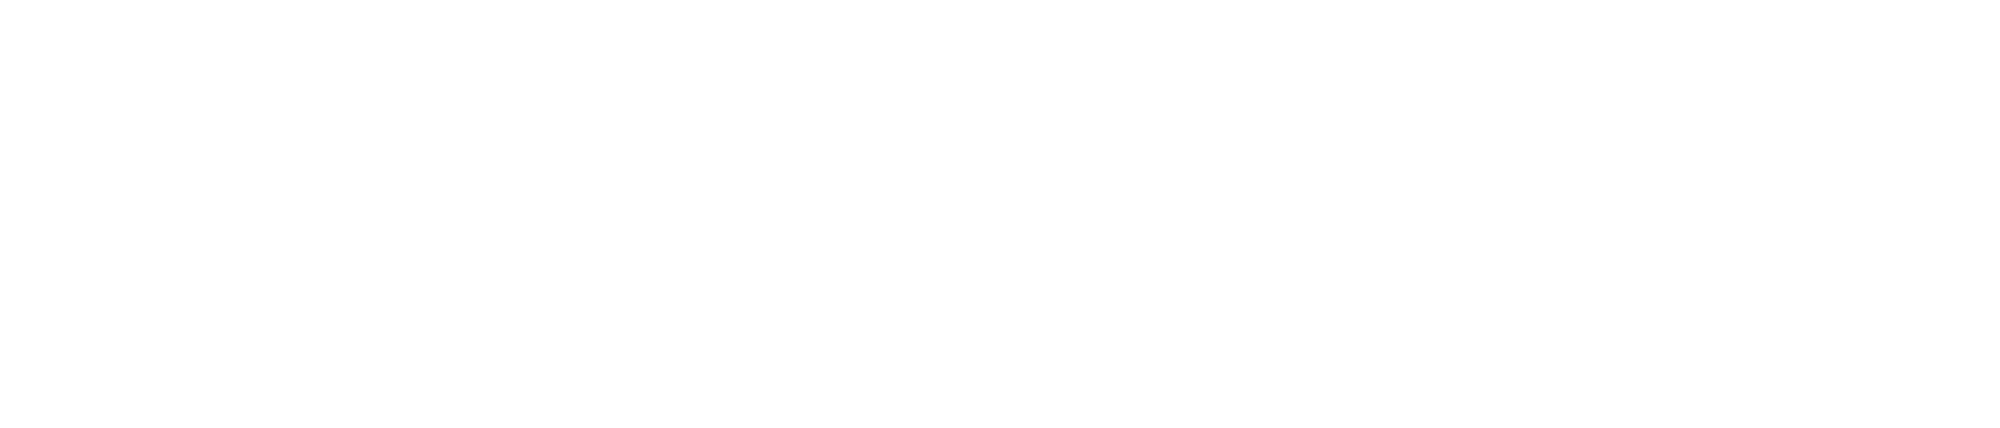 THE AGENCY-logo-white.png